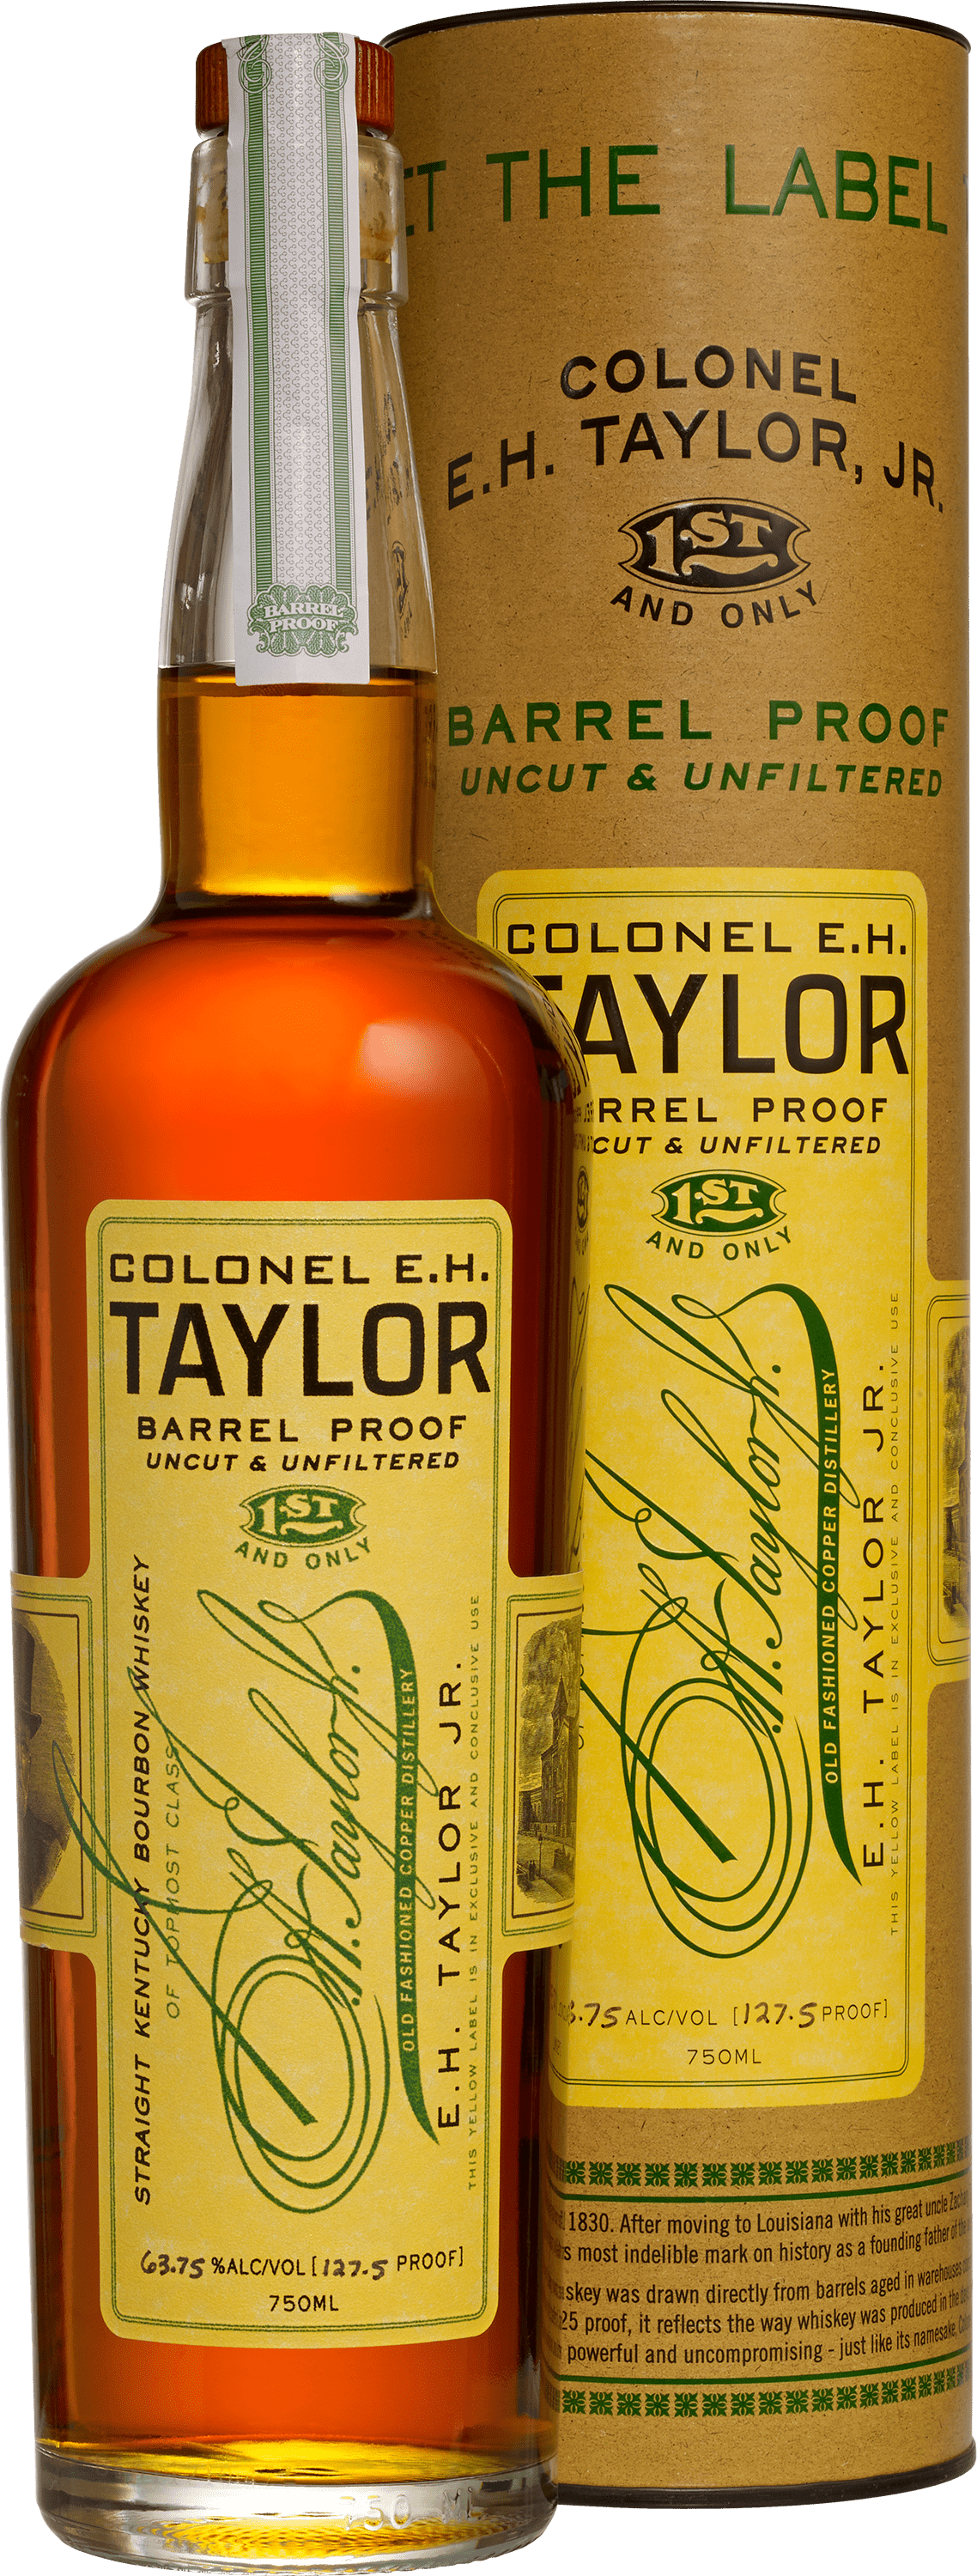 E.H. Taylor, Jr. Barrel Proof 750ml bottle with canister